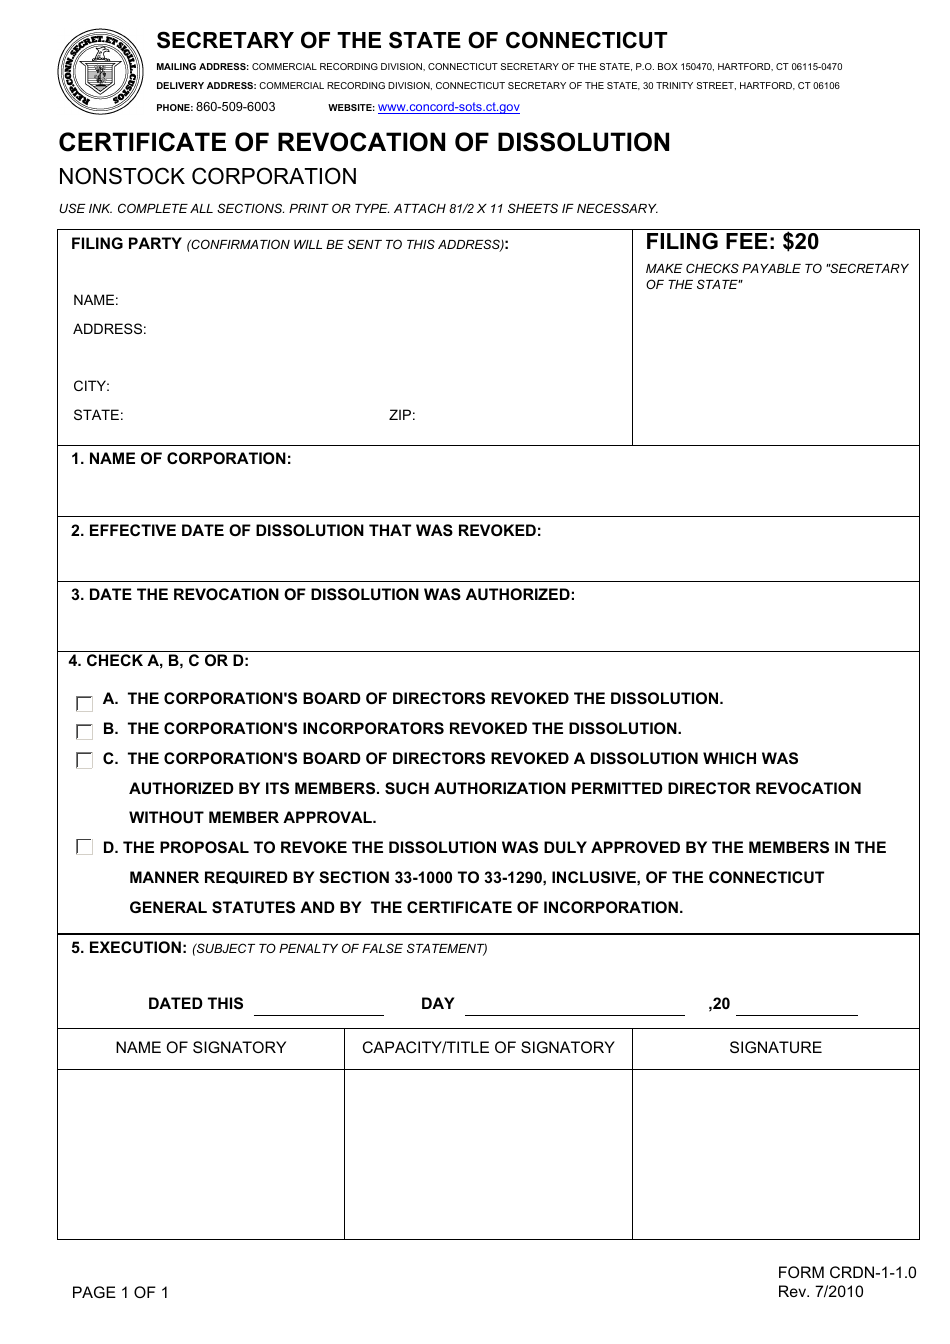 Form CRDN-1-1.0 Certificate of Revocation of Dissolution - Nonstock Corporation - Connecticut, Page 1